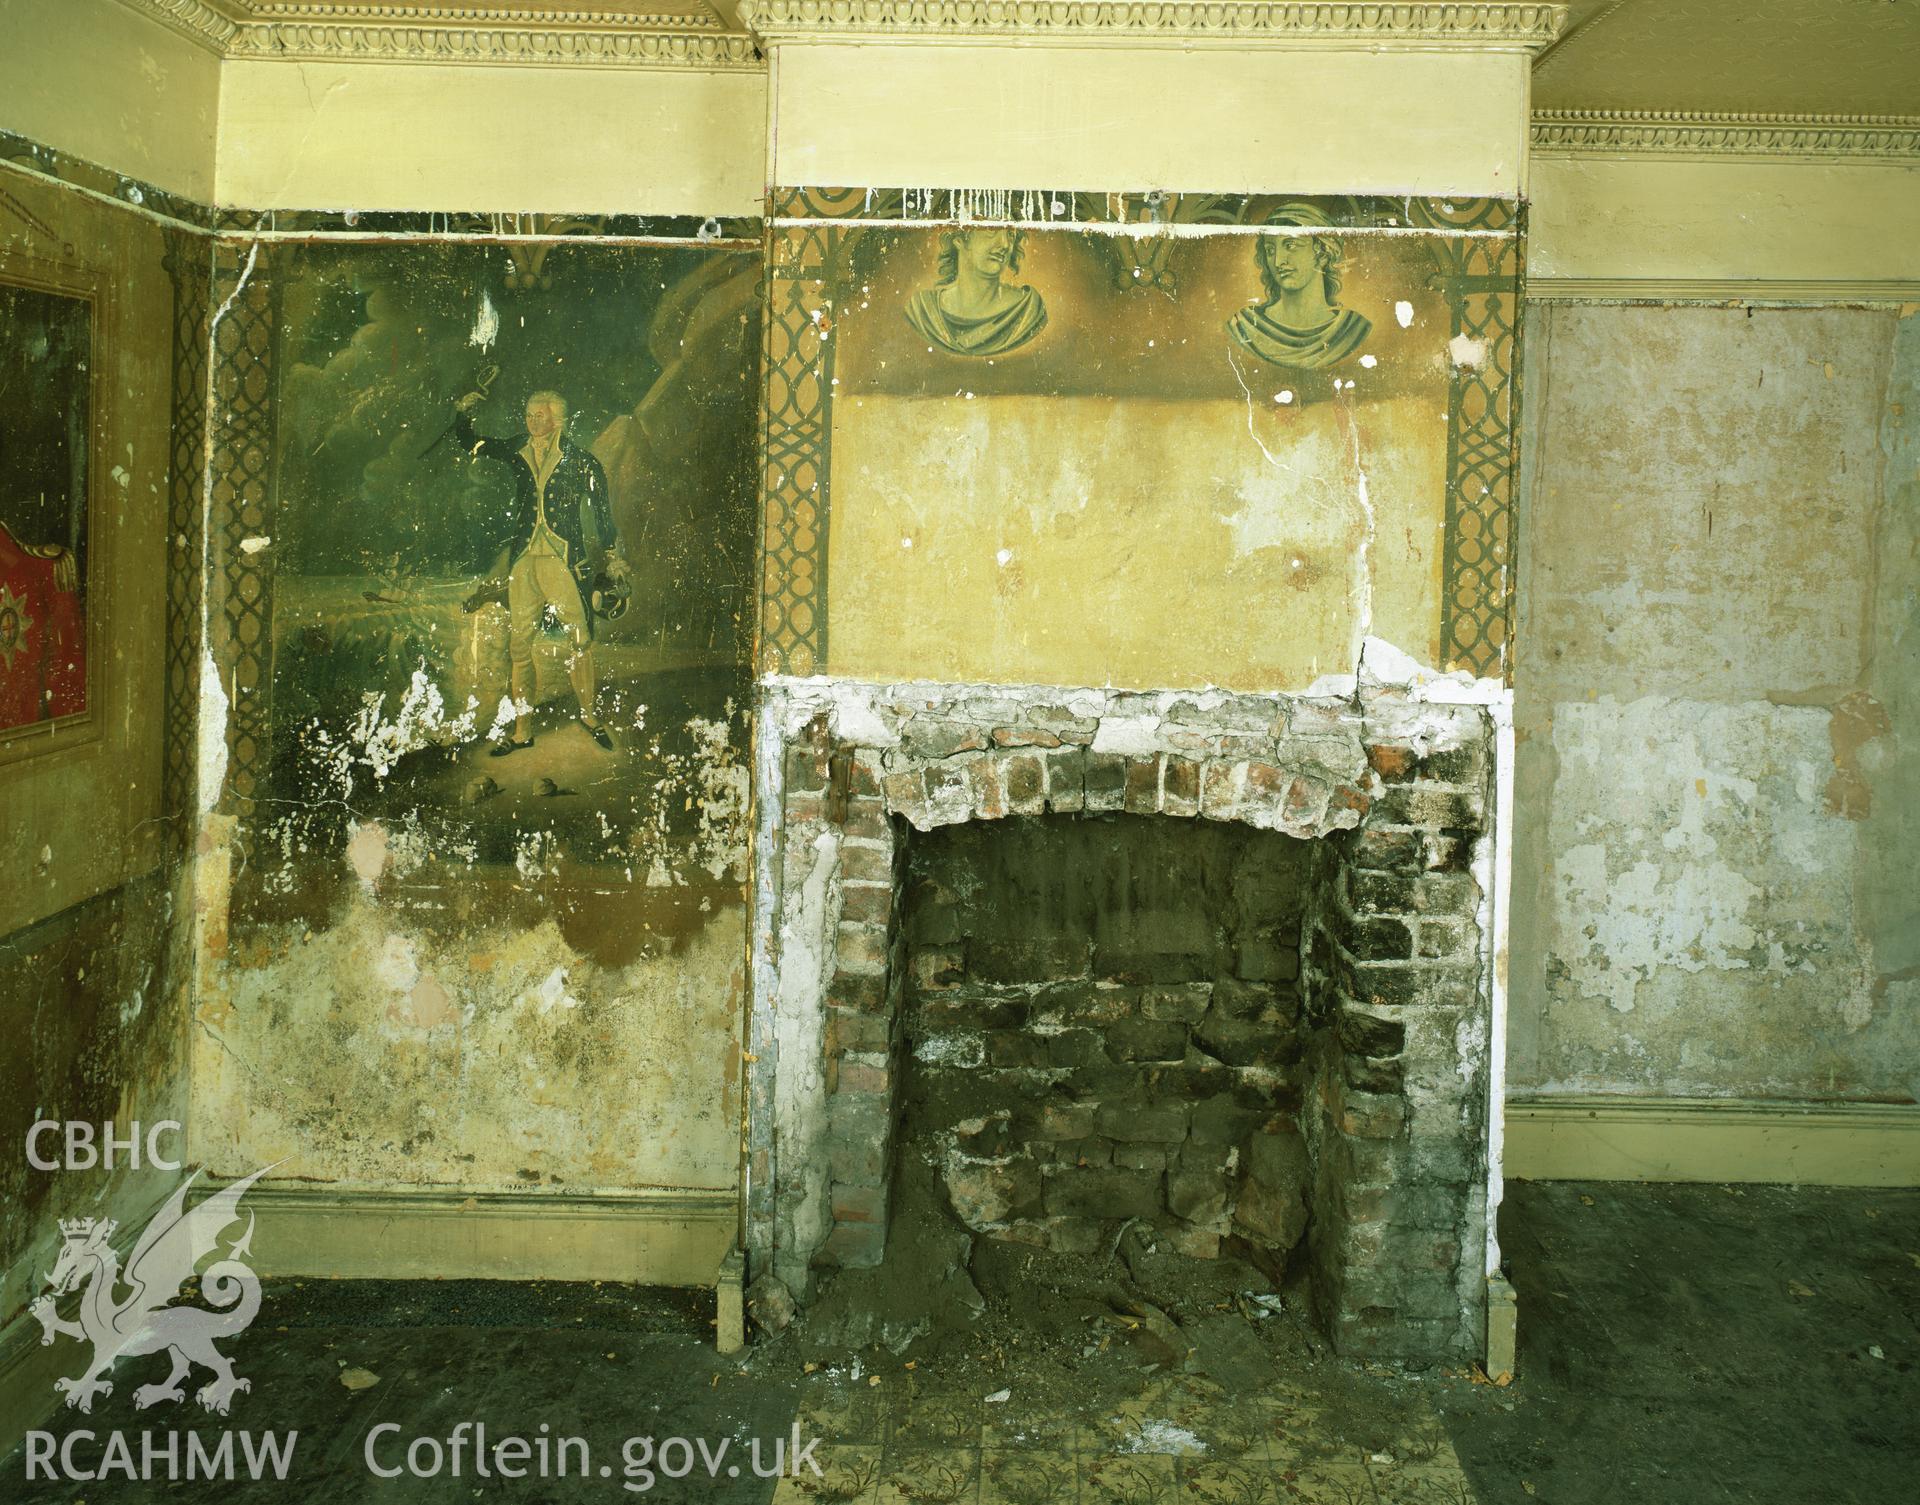 RCAHMW colour transparency showing the paintings either side of the fireplace at Elwy Bank, St Asaph, photographed by Iain Wright, November 2003.